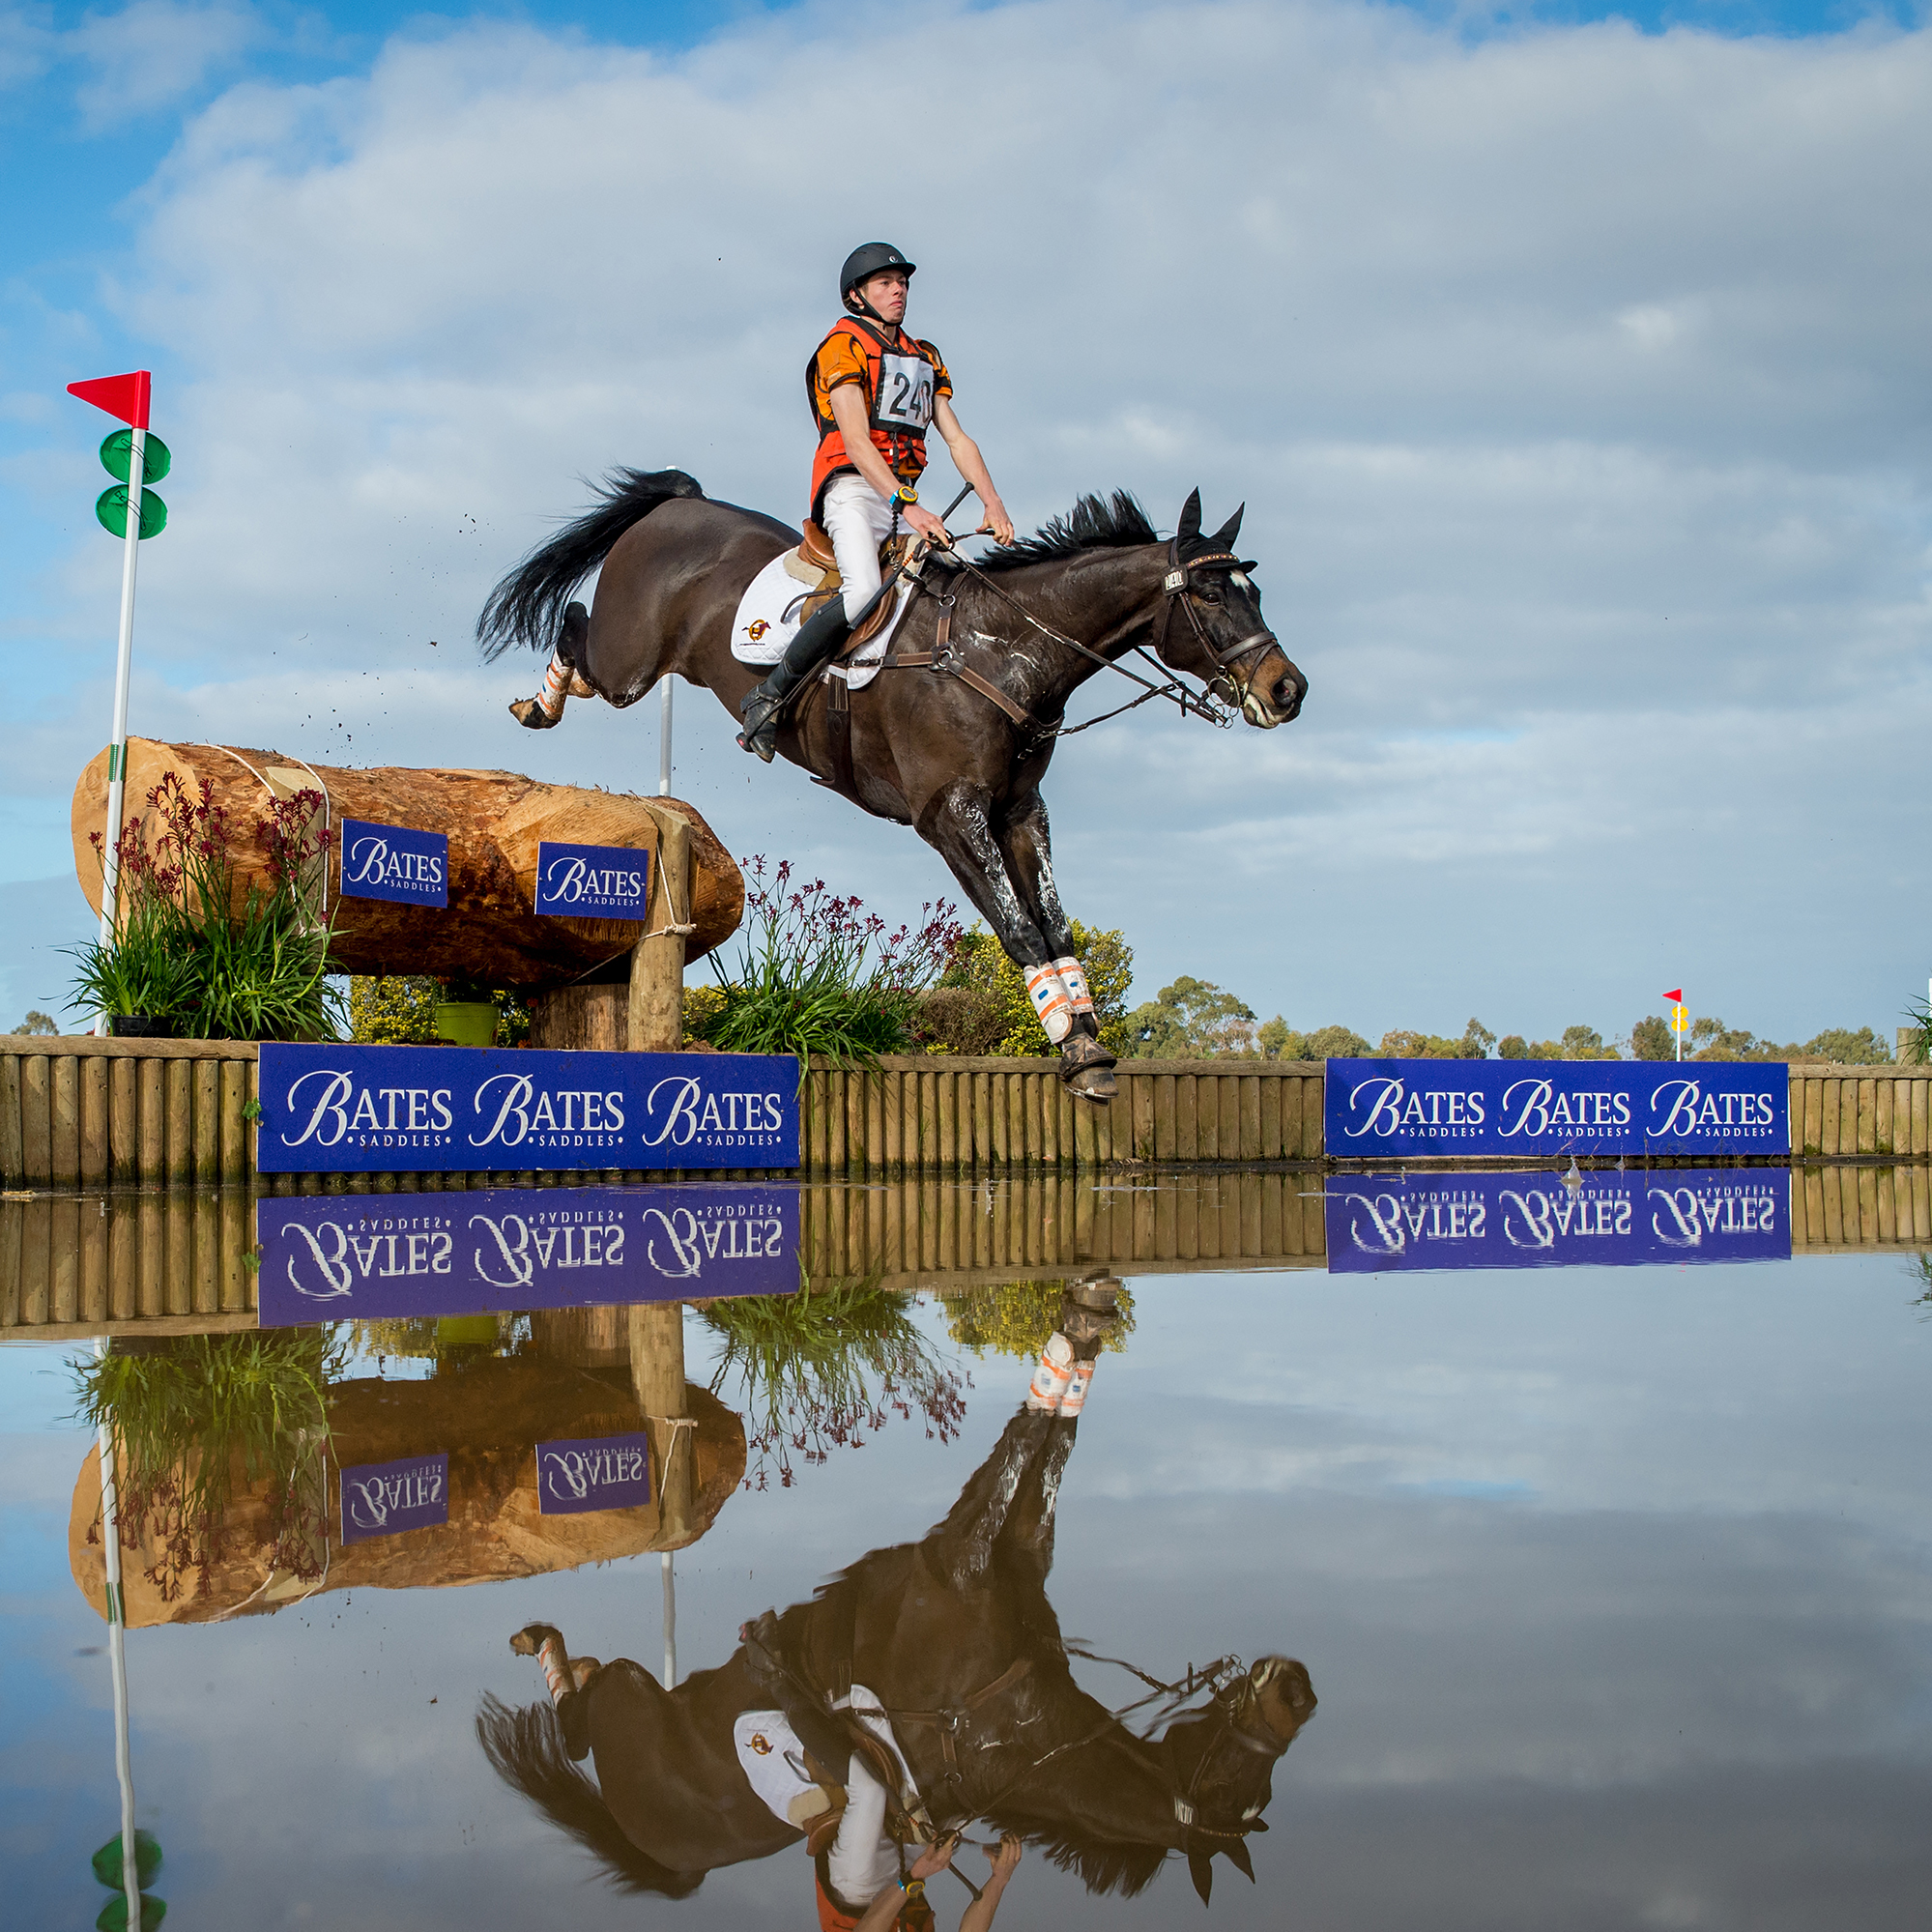 Sam Jeffree riding Jaybee Calypso cross-country at Melbourne International Three Day Event